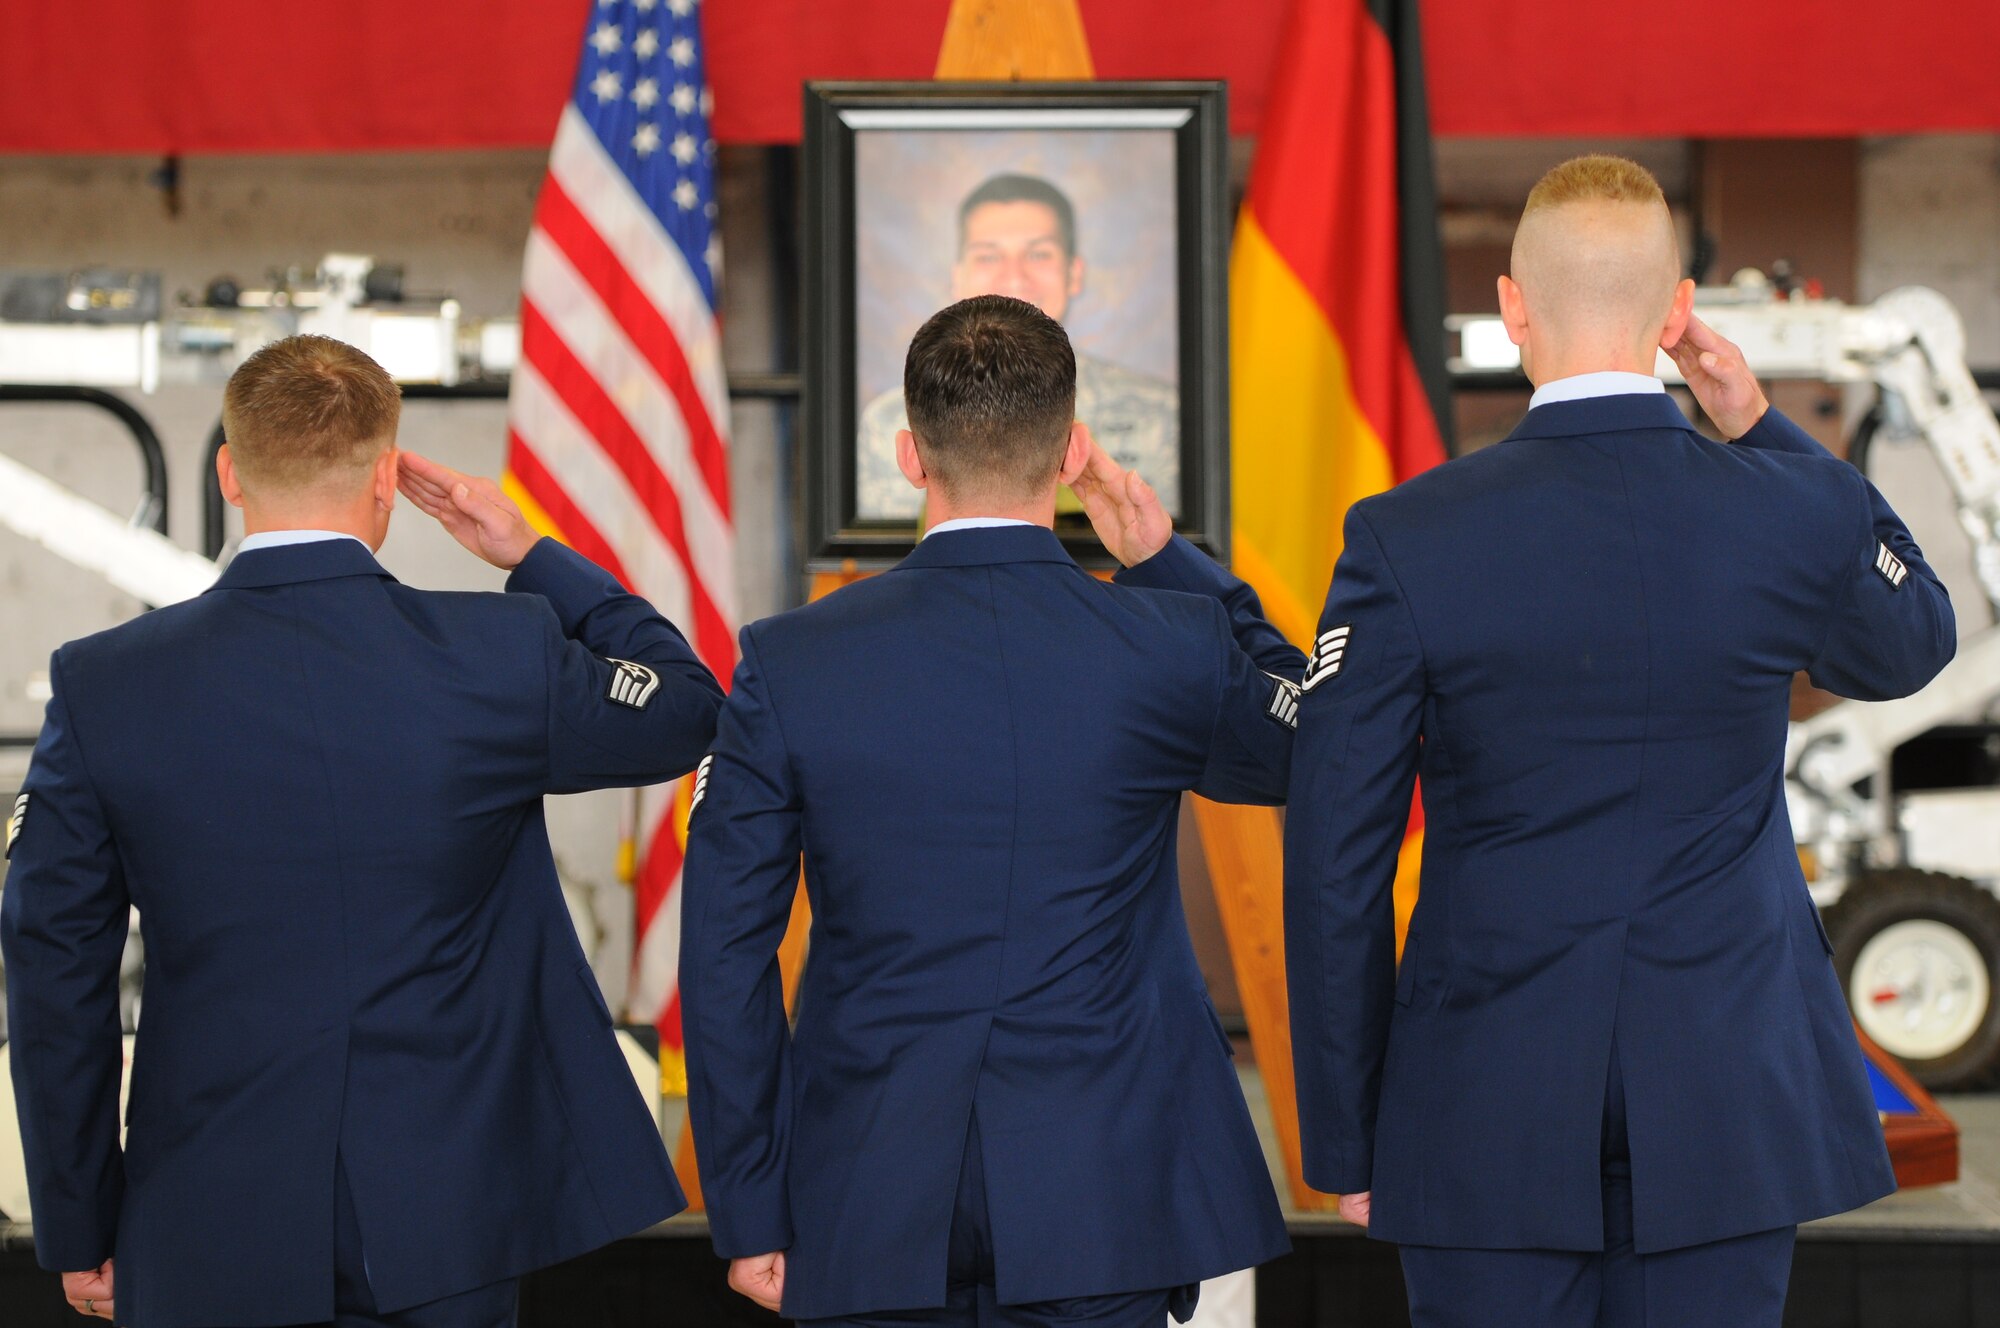 SPANGDAHLEM AIR BASE, Germany – Airmen from the 52nd Civil Engineer Squadron Explosive Ordnance Flight, pay respects to fellow flight member Staff Sgt. Joseph J. Hamski’s Fallen Airman Memorial during his memorial service held here June 16. Sergeant Hamski was killed in action May 26, 2011, in Shorabak, Afghanistan, while responding to a known enemy weapons cache. (U.S. Air Force photo/Airman 1st Class Dillon Davis)